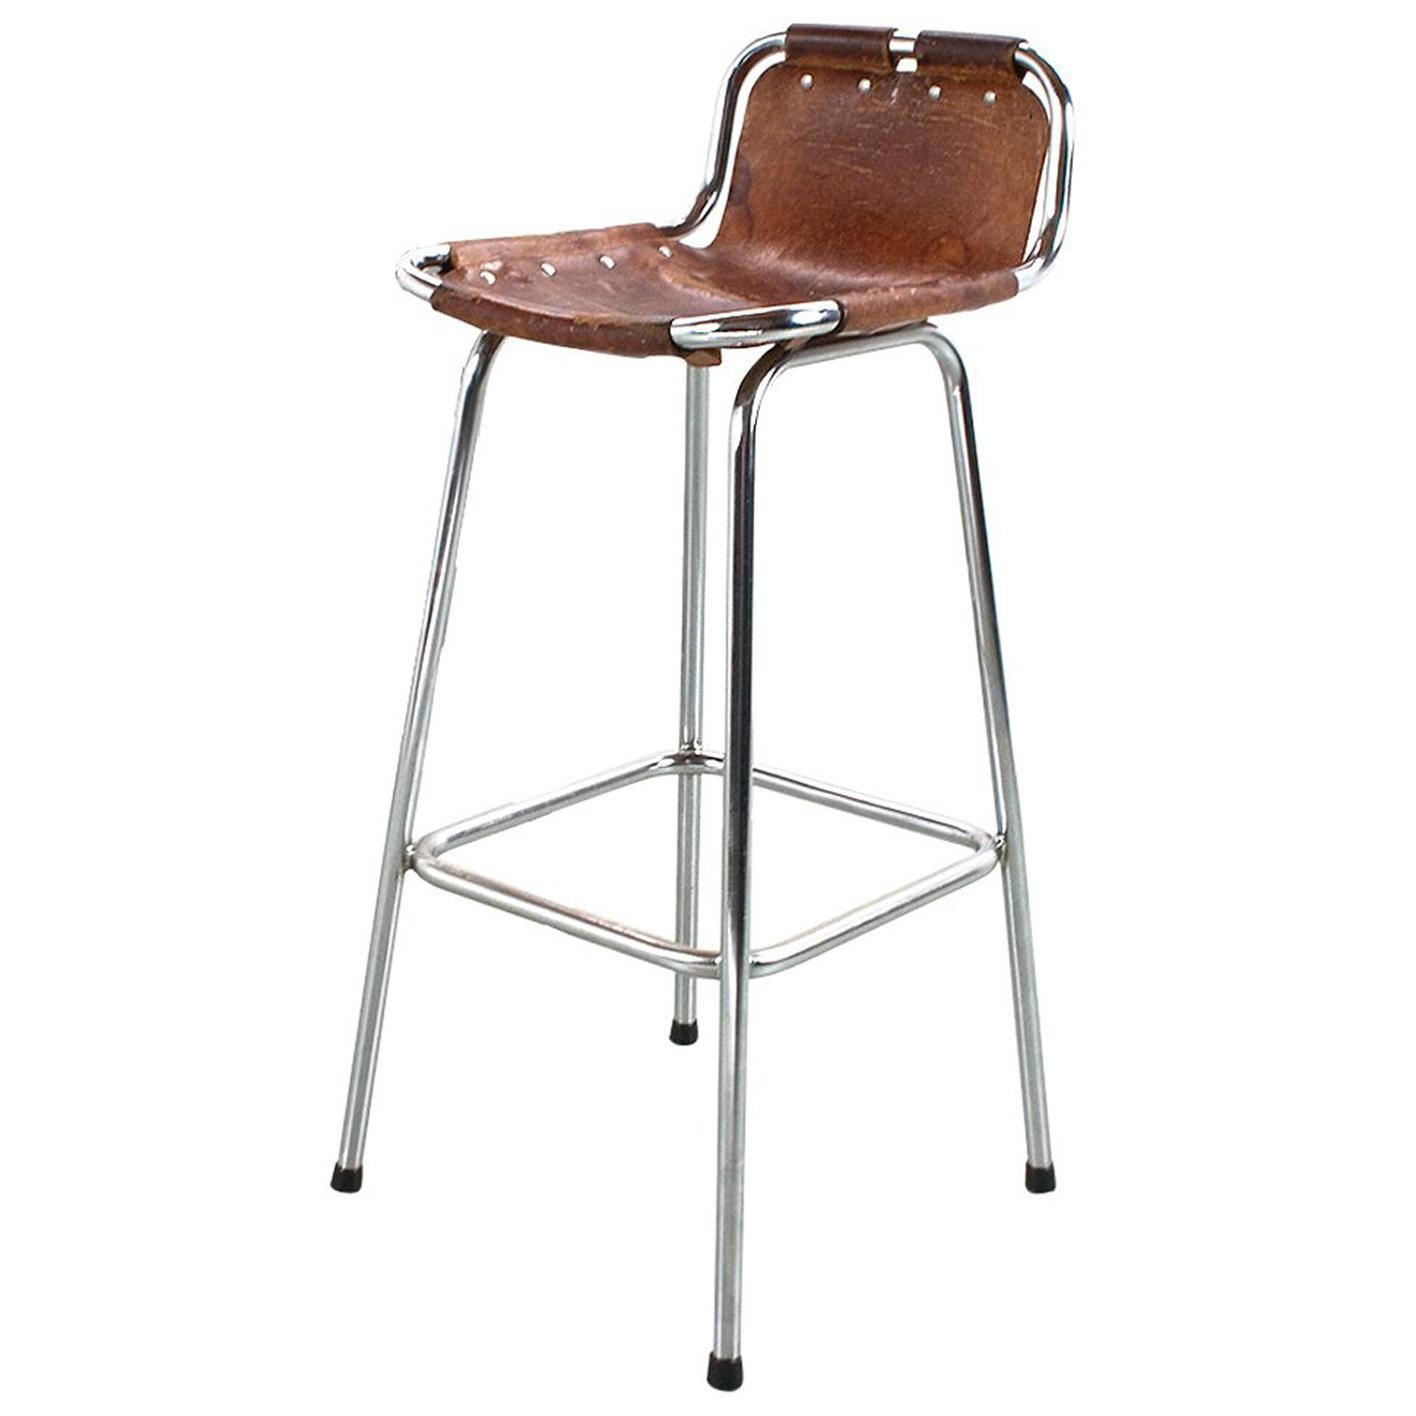 Les Arcs Stool in Camel Coloured Leather, Mid-Century Modern French, 1960s